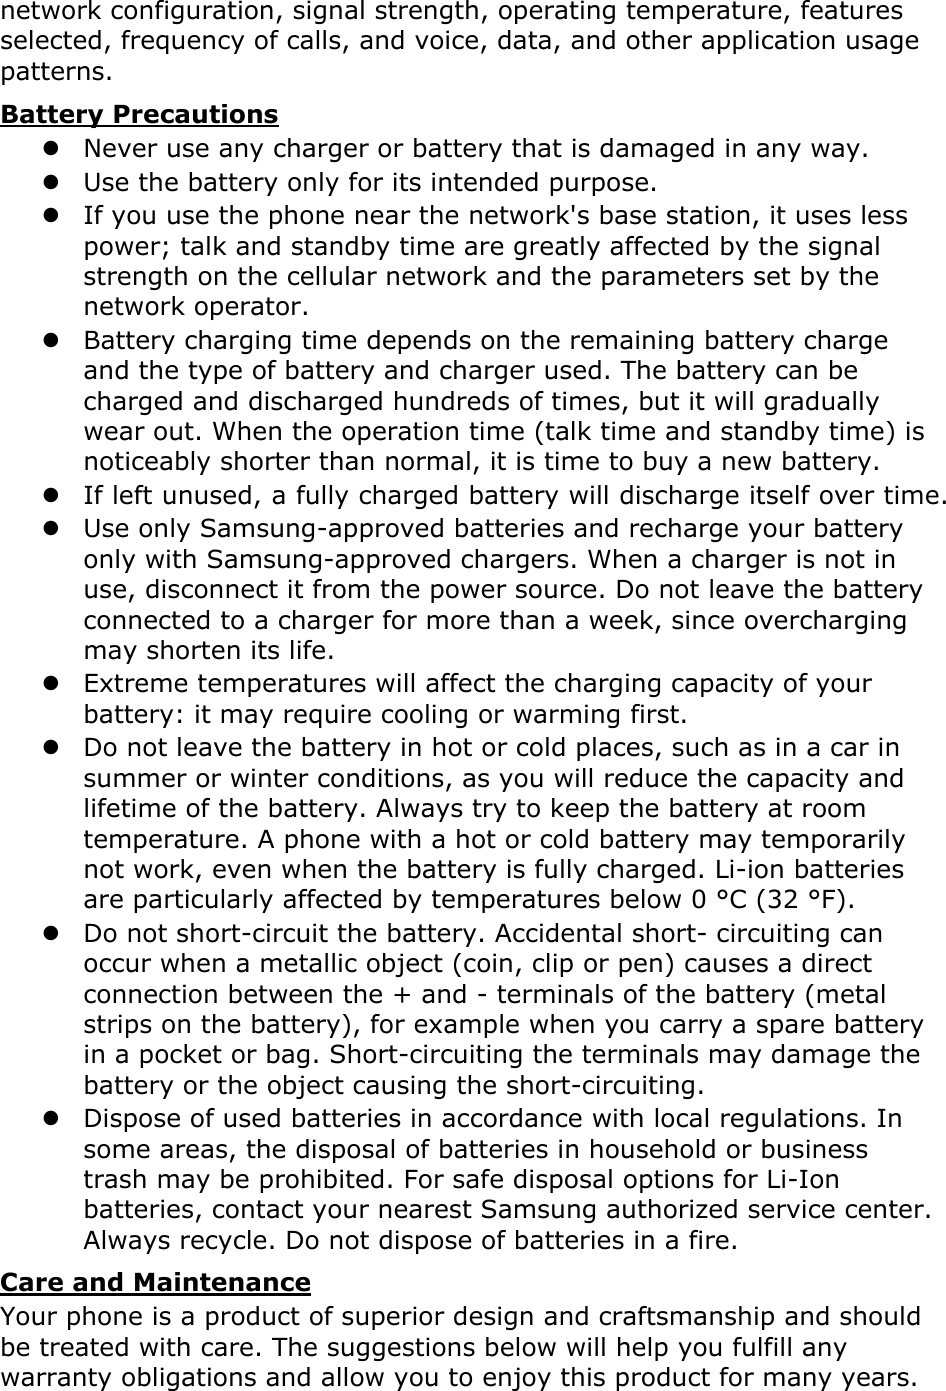 Page 25 of Samsung Electronics Co GTS8600 Cellular/PCS GSM Phone with WLAN and Bluetooth User Manual